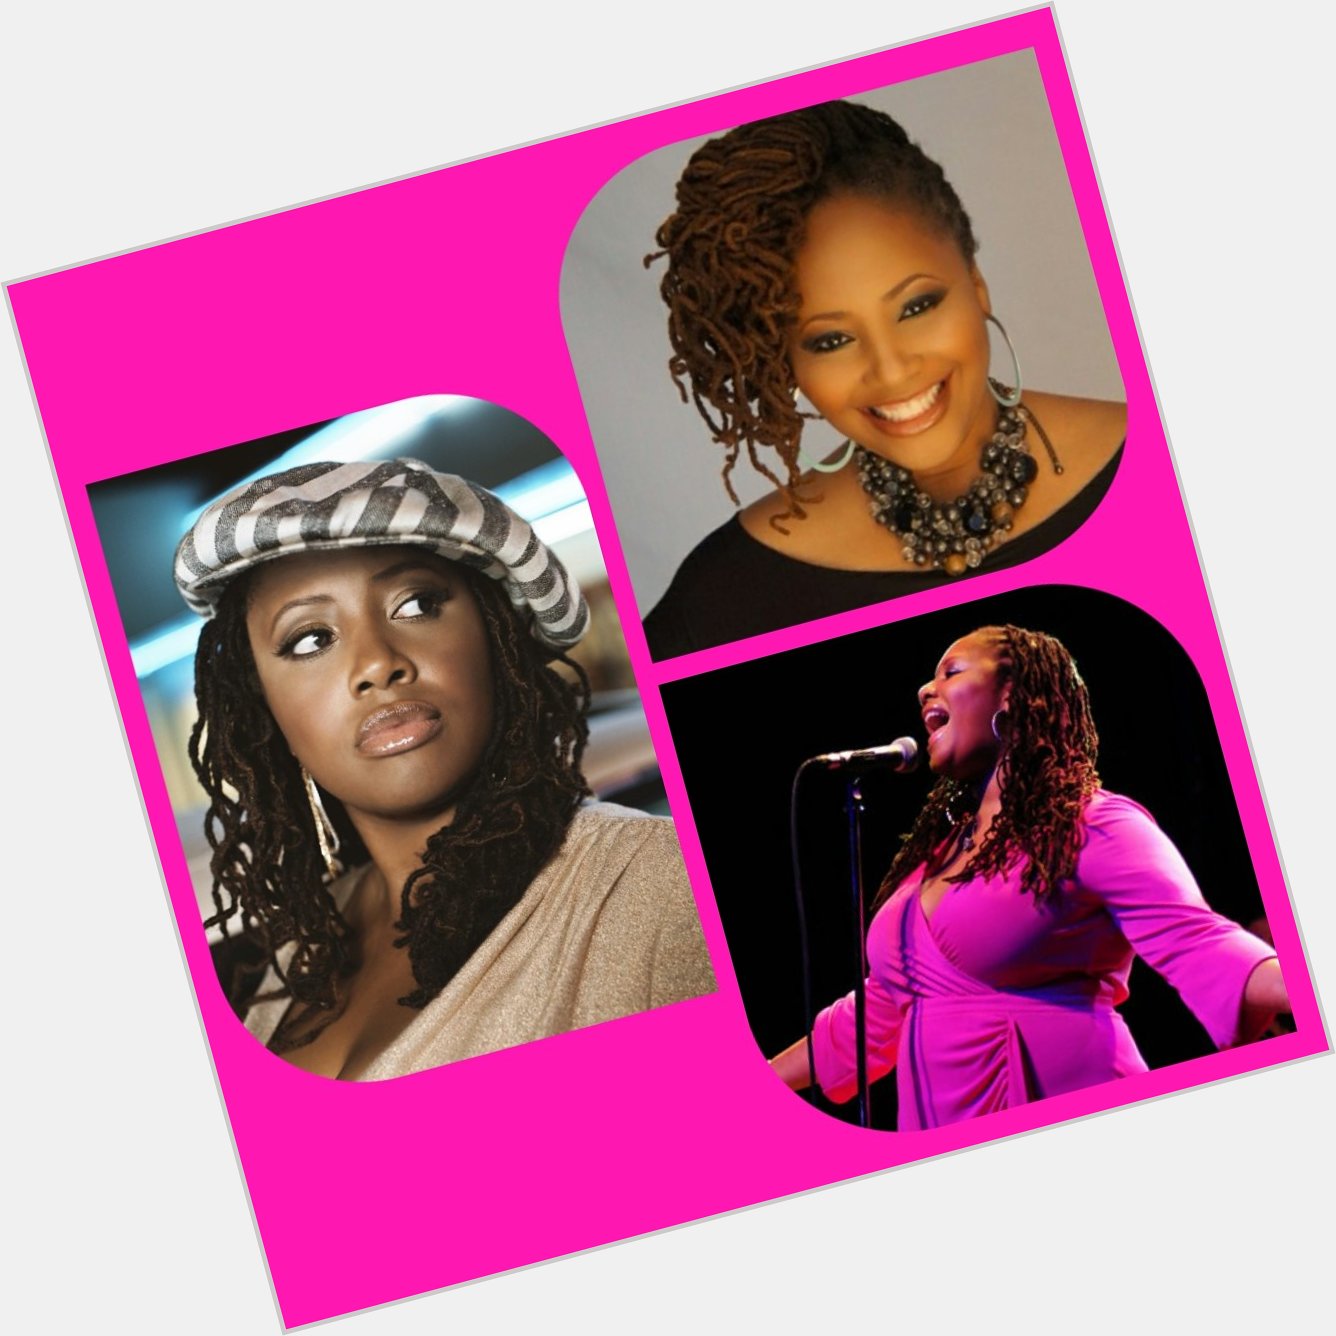 HAPPY BIRTHDAY to Ms. Lalah Hathaway! Continued Blessings to one of my very favorite artist!  